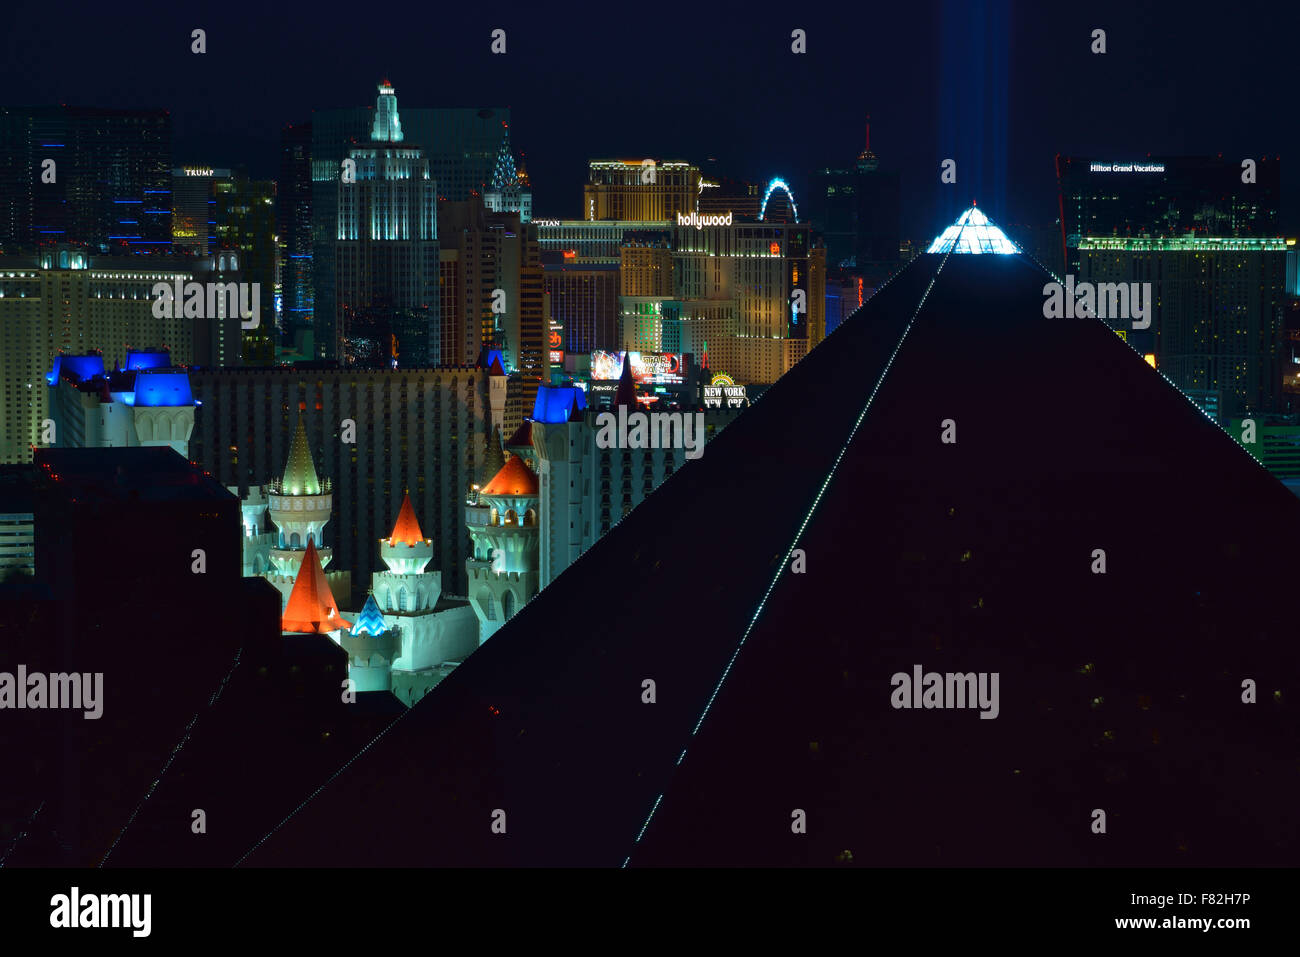 The Luxor hotel and the South Strip skyline during twilight, Las Vegas NV (seen from the Delano hotel) Stock Photo